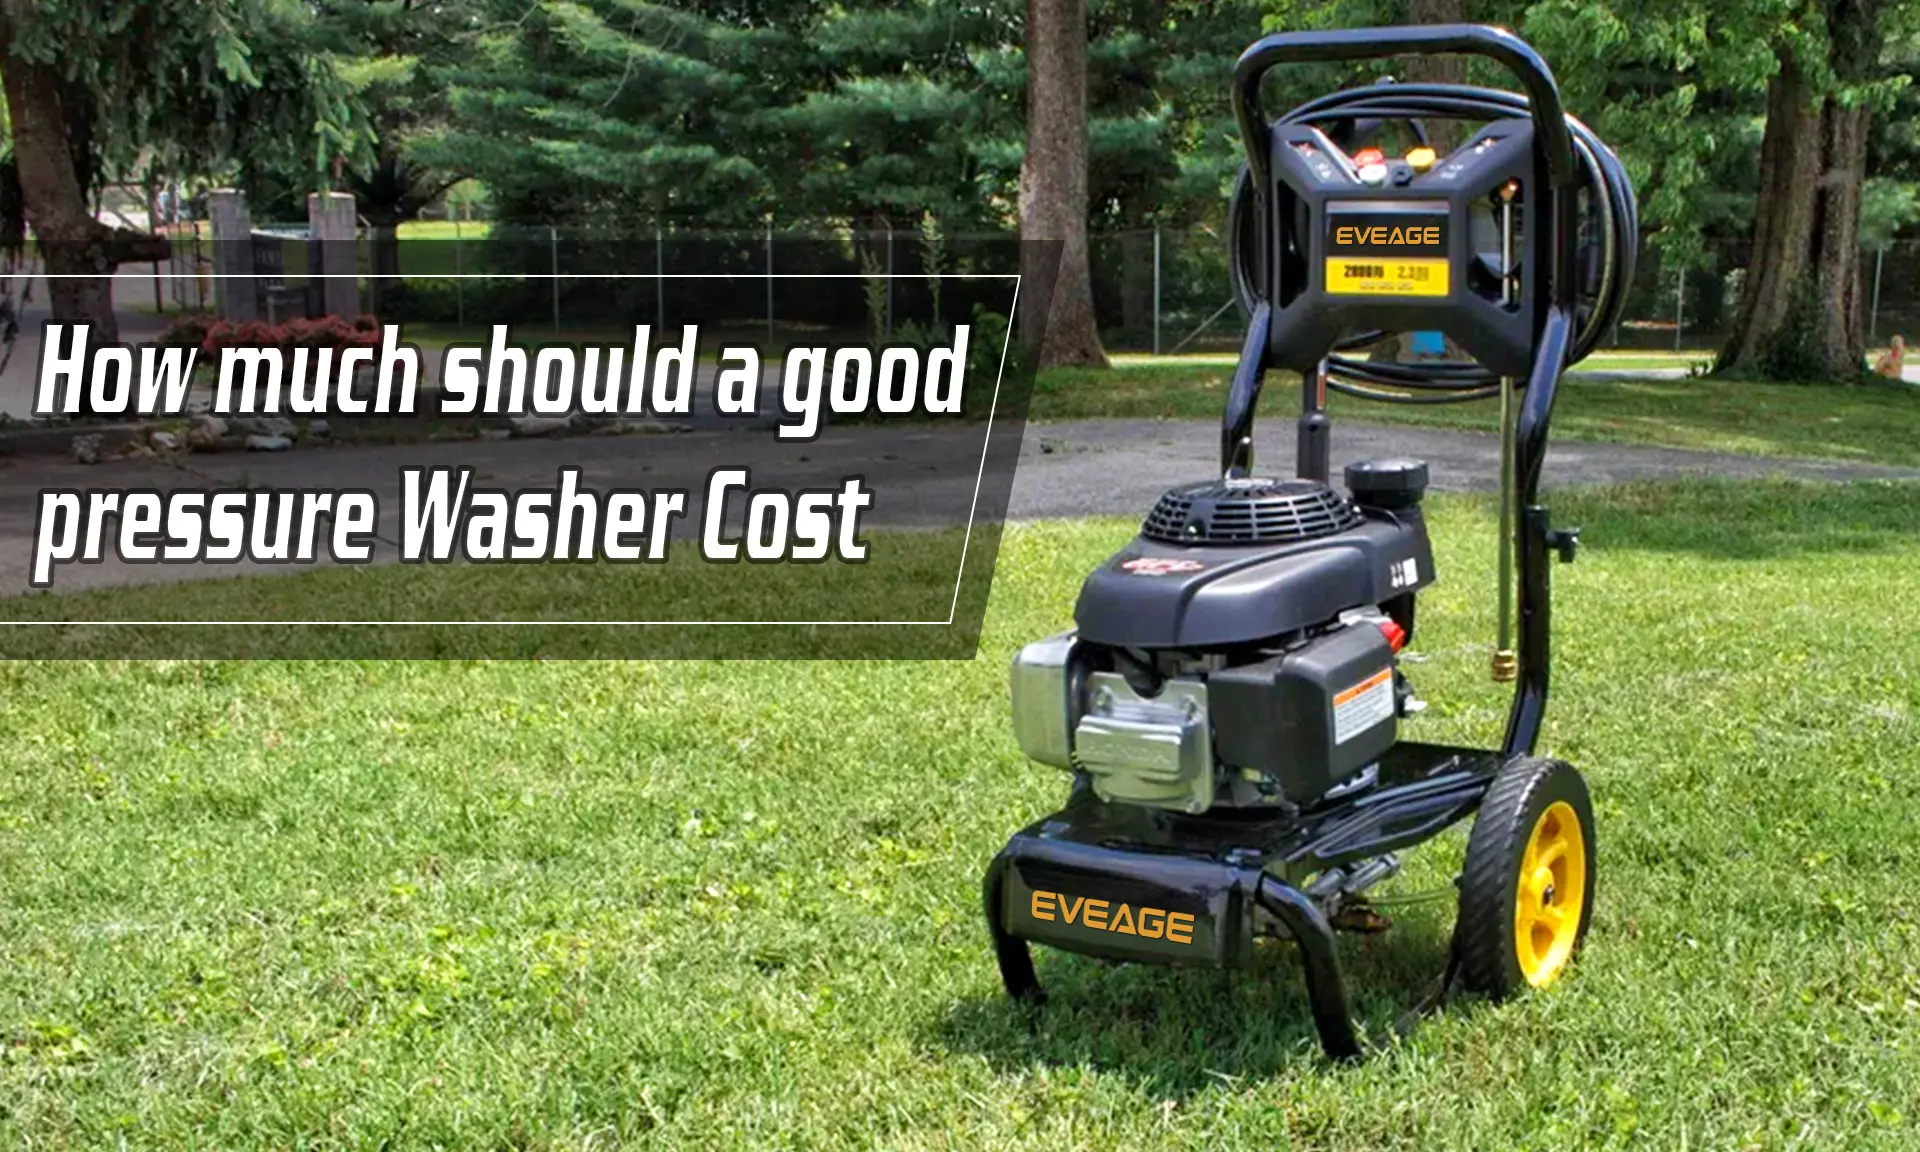 How much should a good pressure Washer Cost